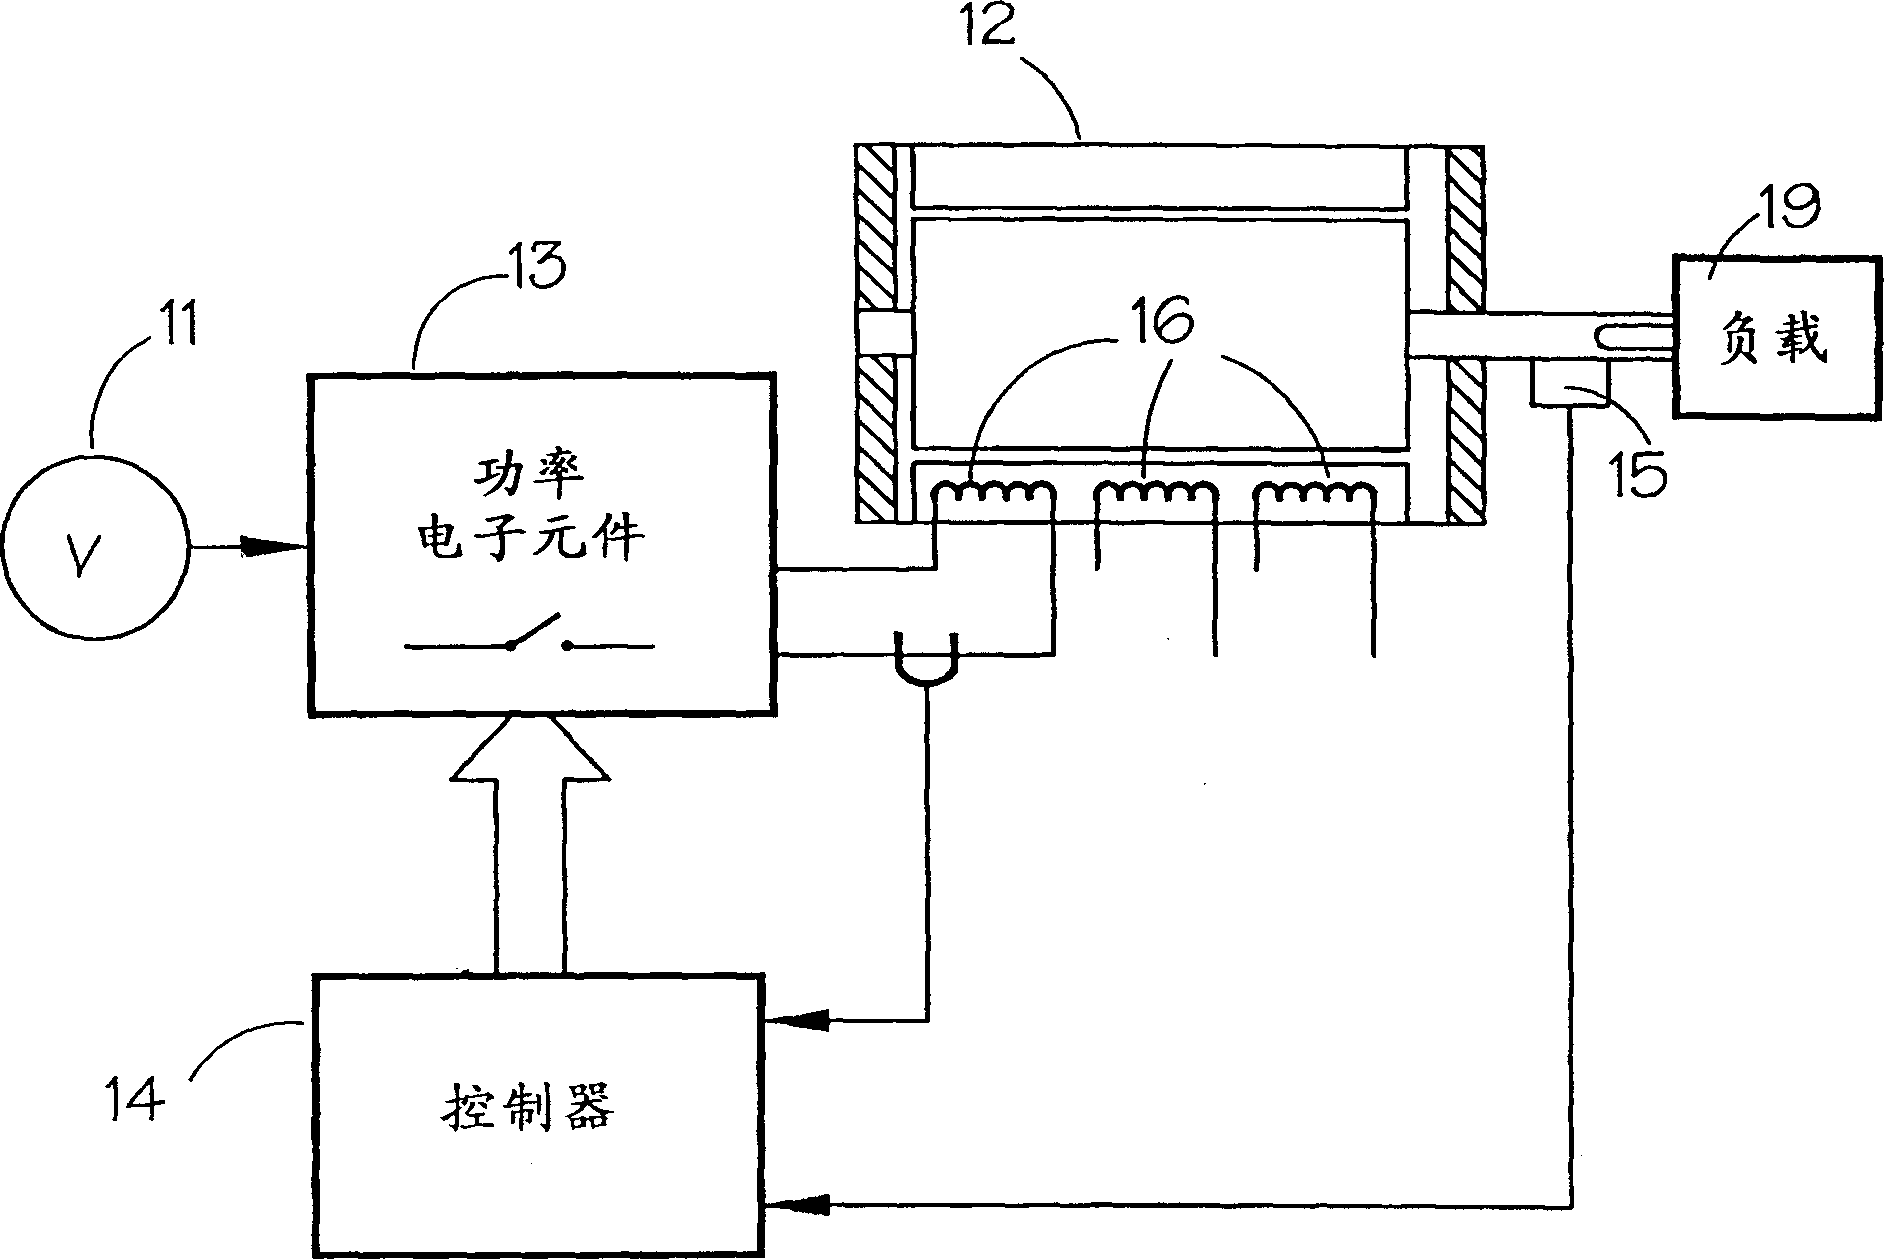 Excitation of switch magnetic resistance motor